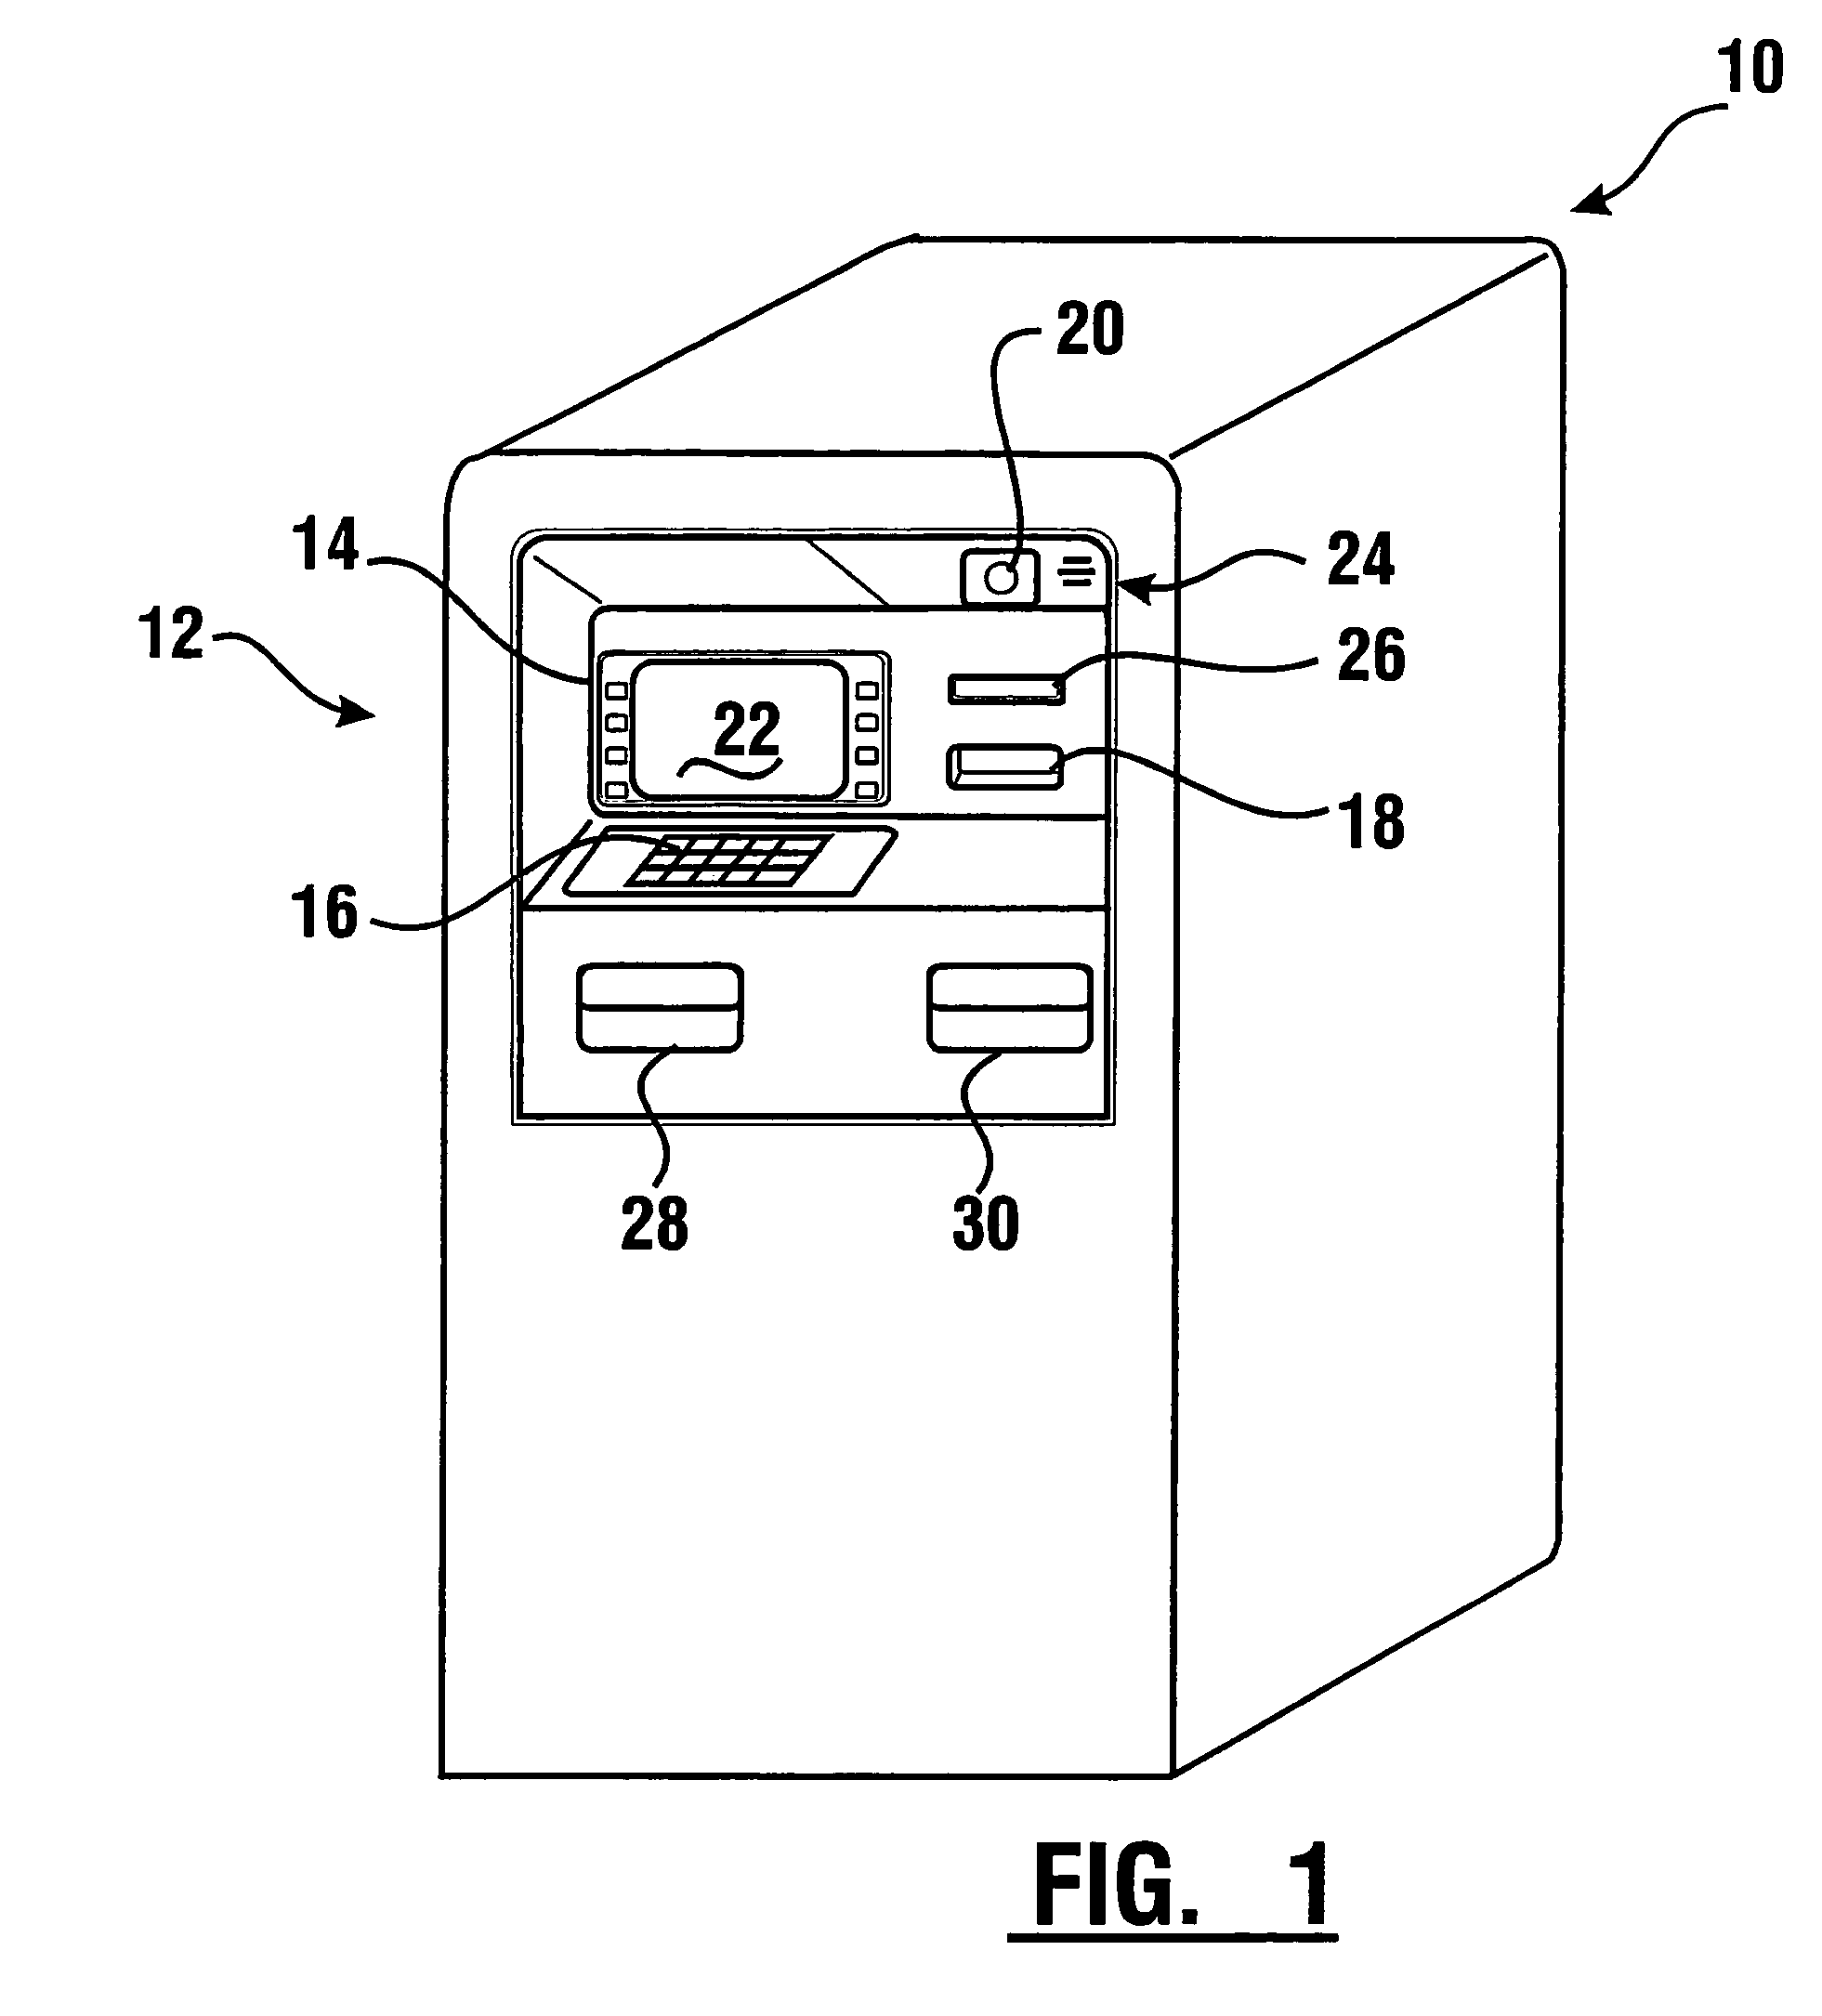 Method of evaluating checks deposited into a cash dispensing automated banking machine